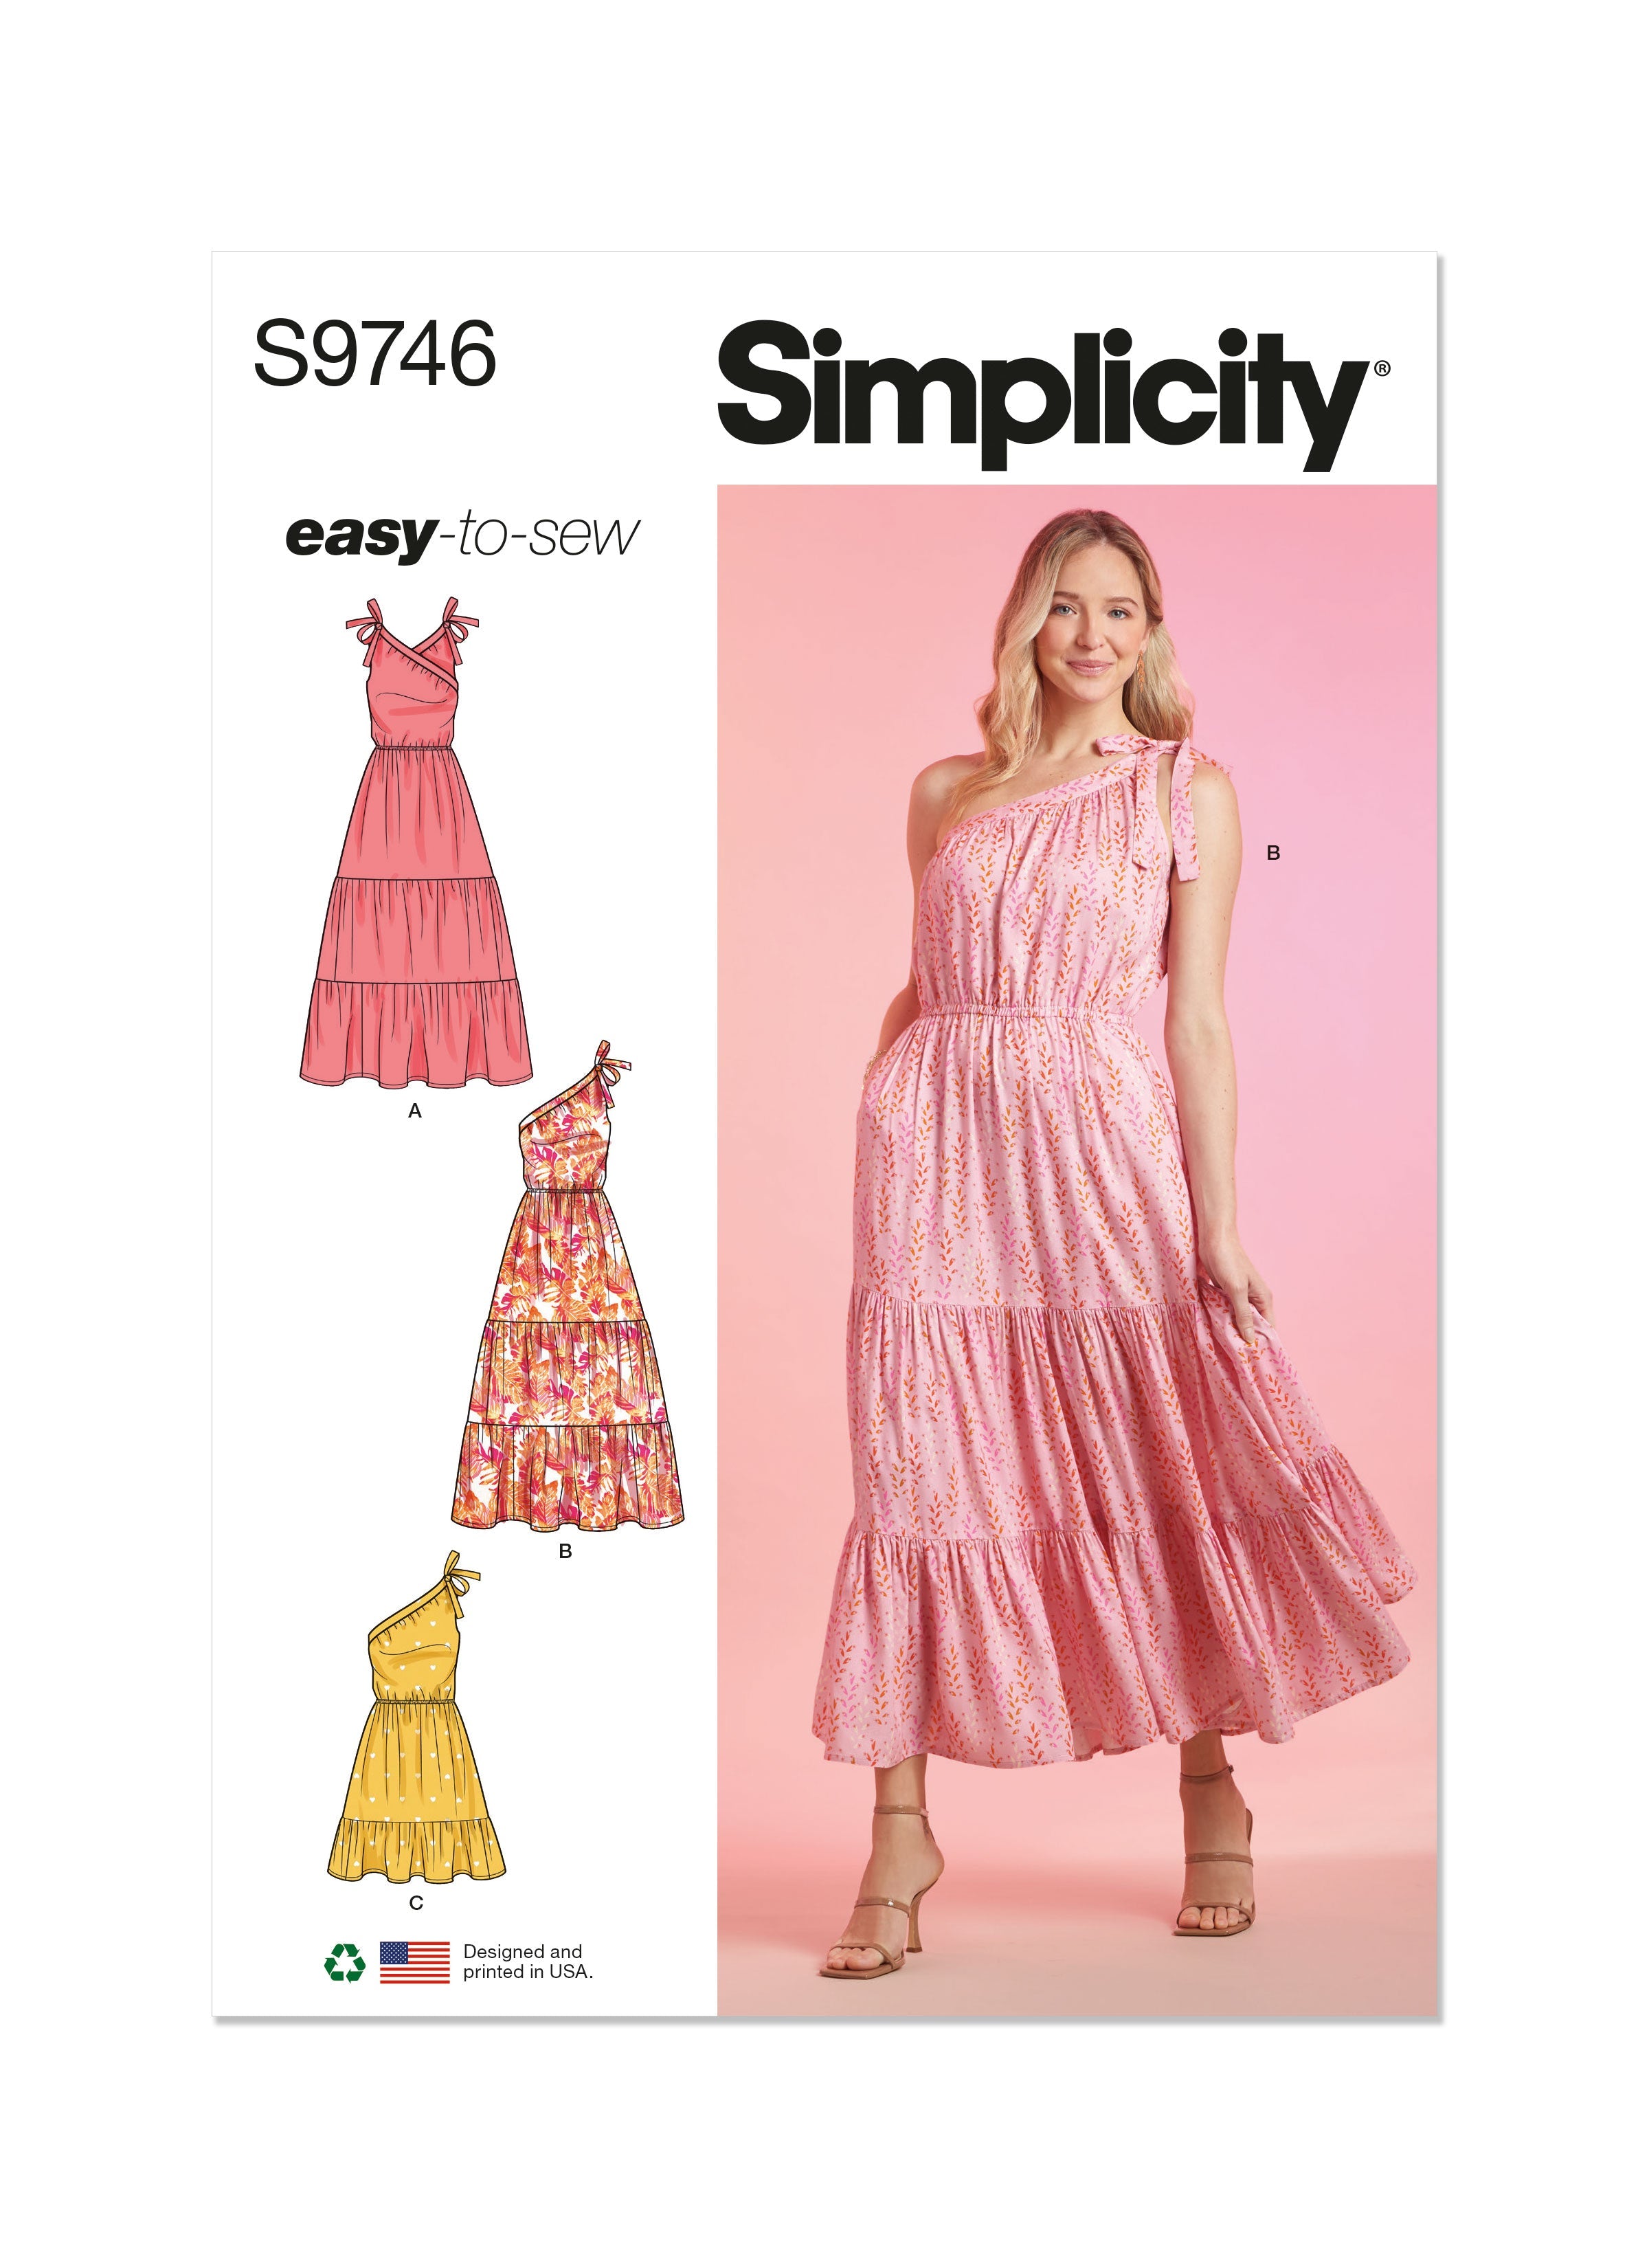 Simplicity 9746 sewing pattern Misses' Dresses from Jaycotts Sewing Supplies